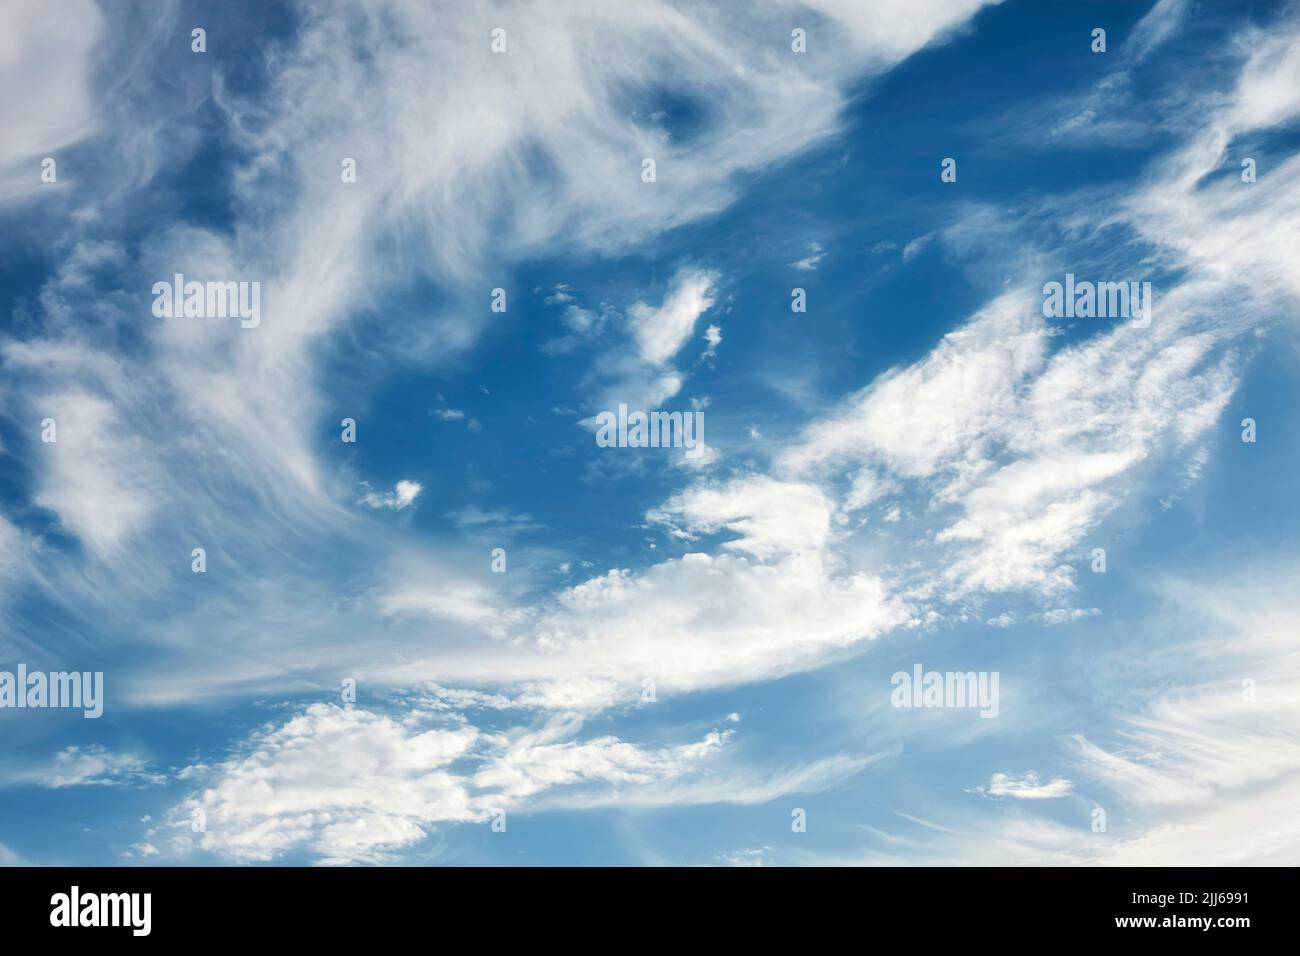 Blue sky with clouds at sunset, natural background. Stock Photo